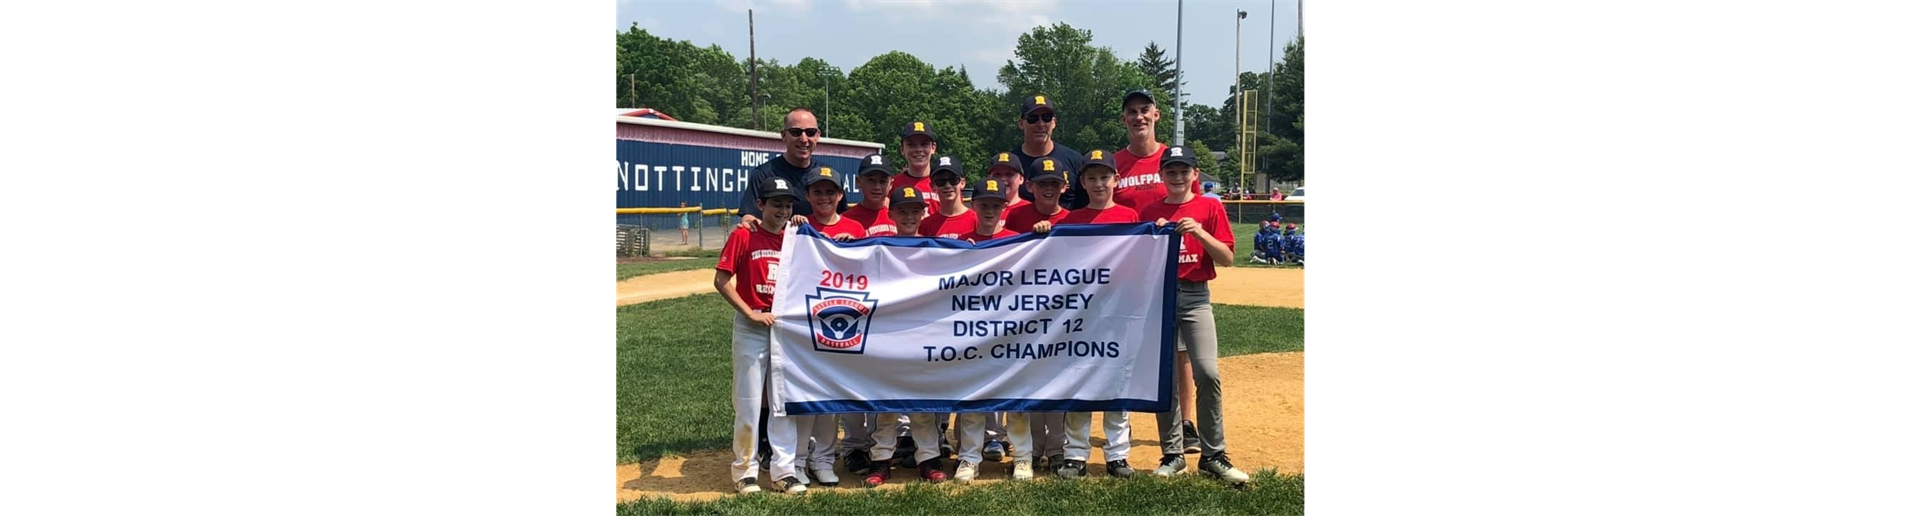 2019 Majors Division Tournament of Champions Winners